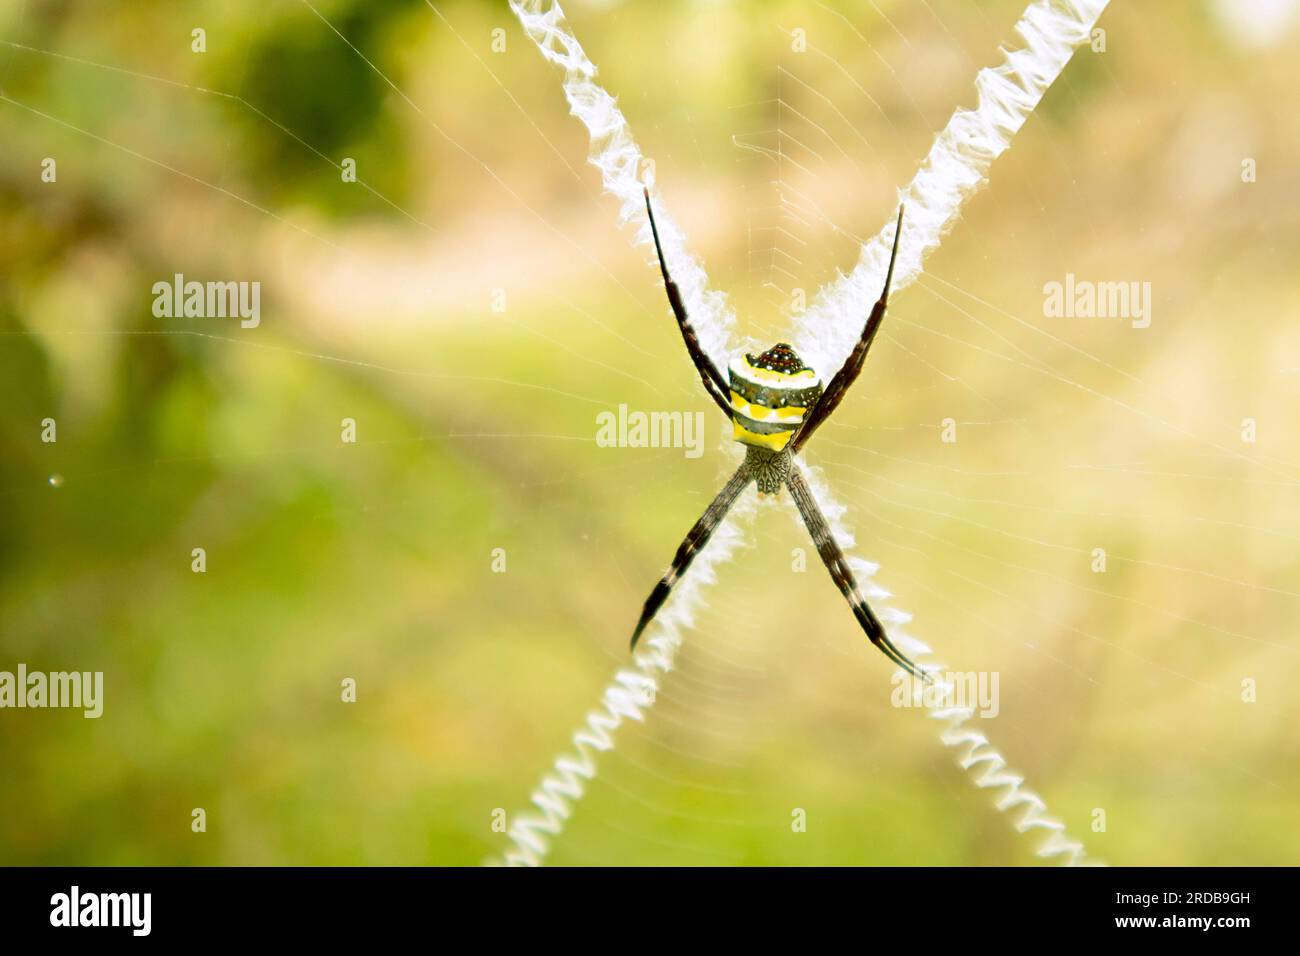 Spider on a spider web in the forest. Macro photography of nature. Stock Photo